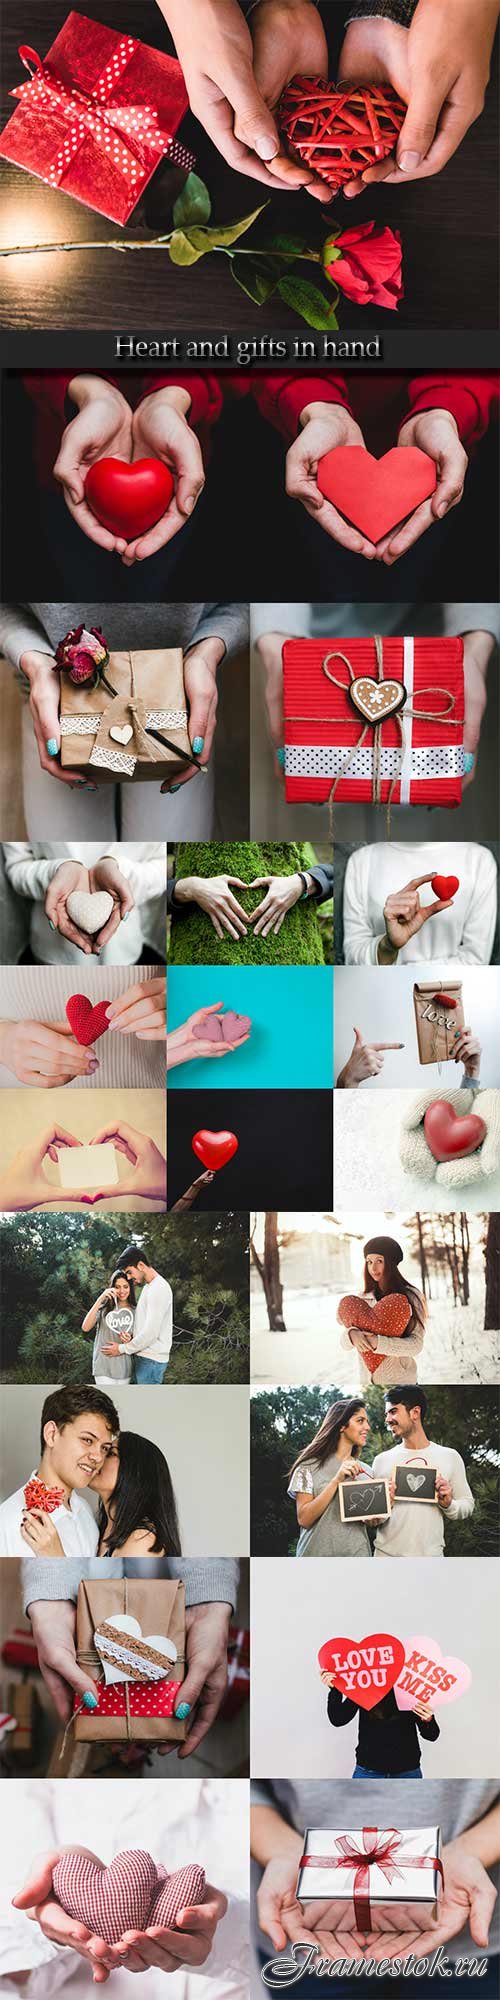 Heart and gifts in hand